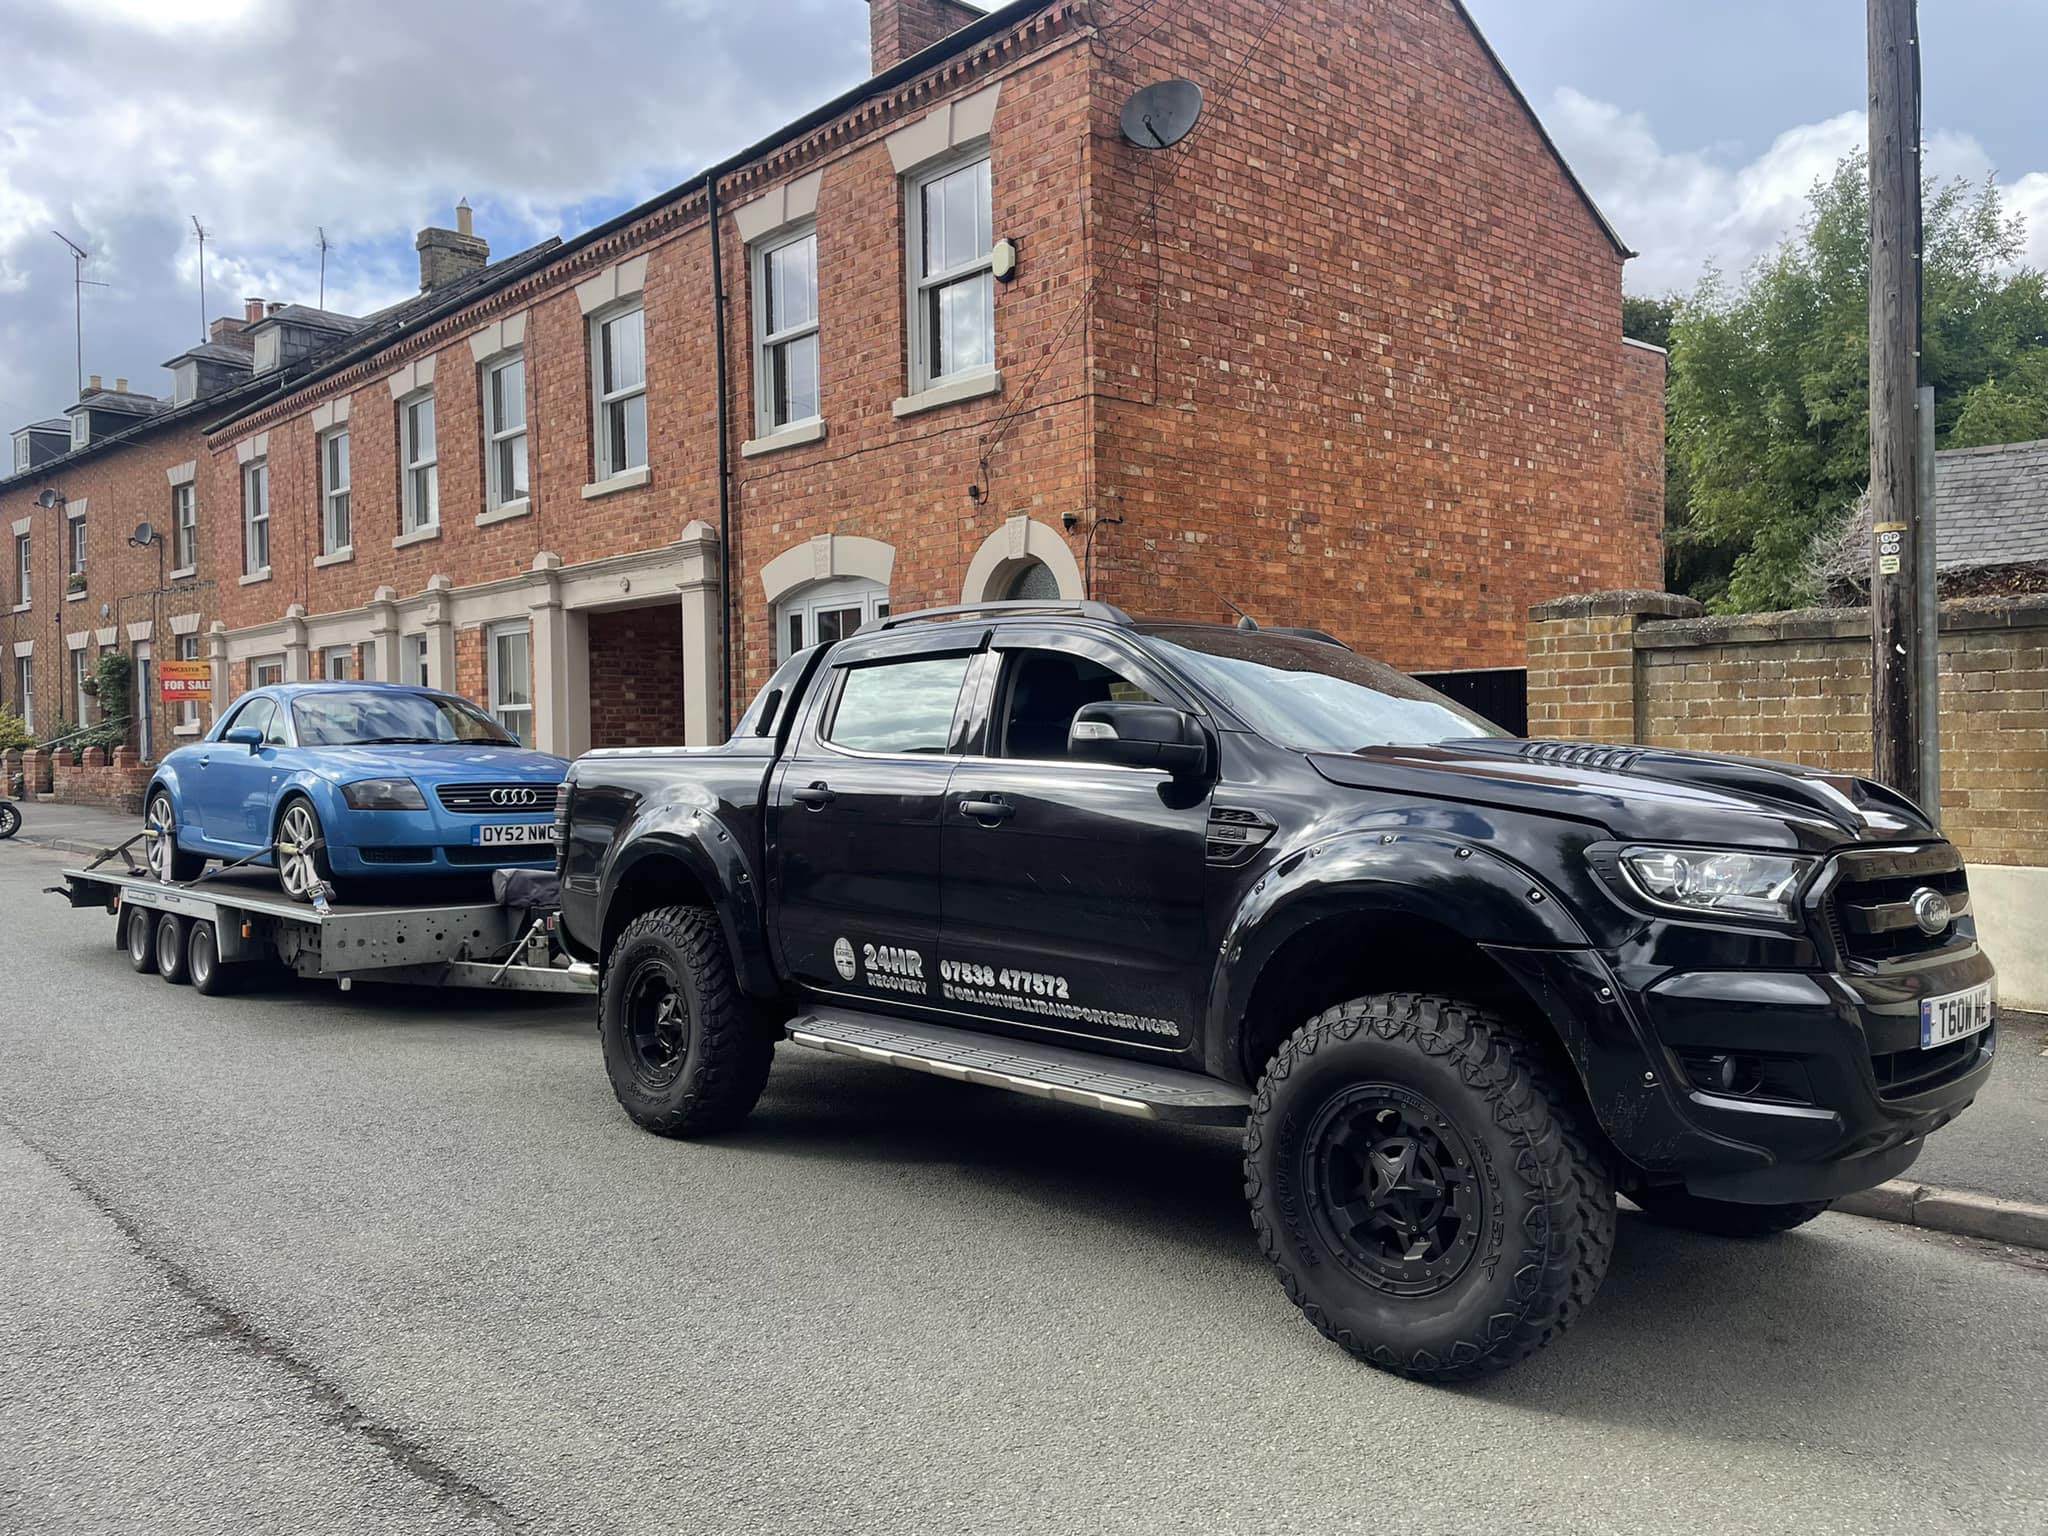 24 Hour Tow Truck Colchester